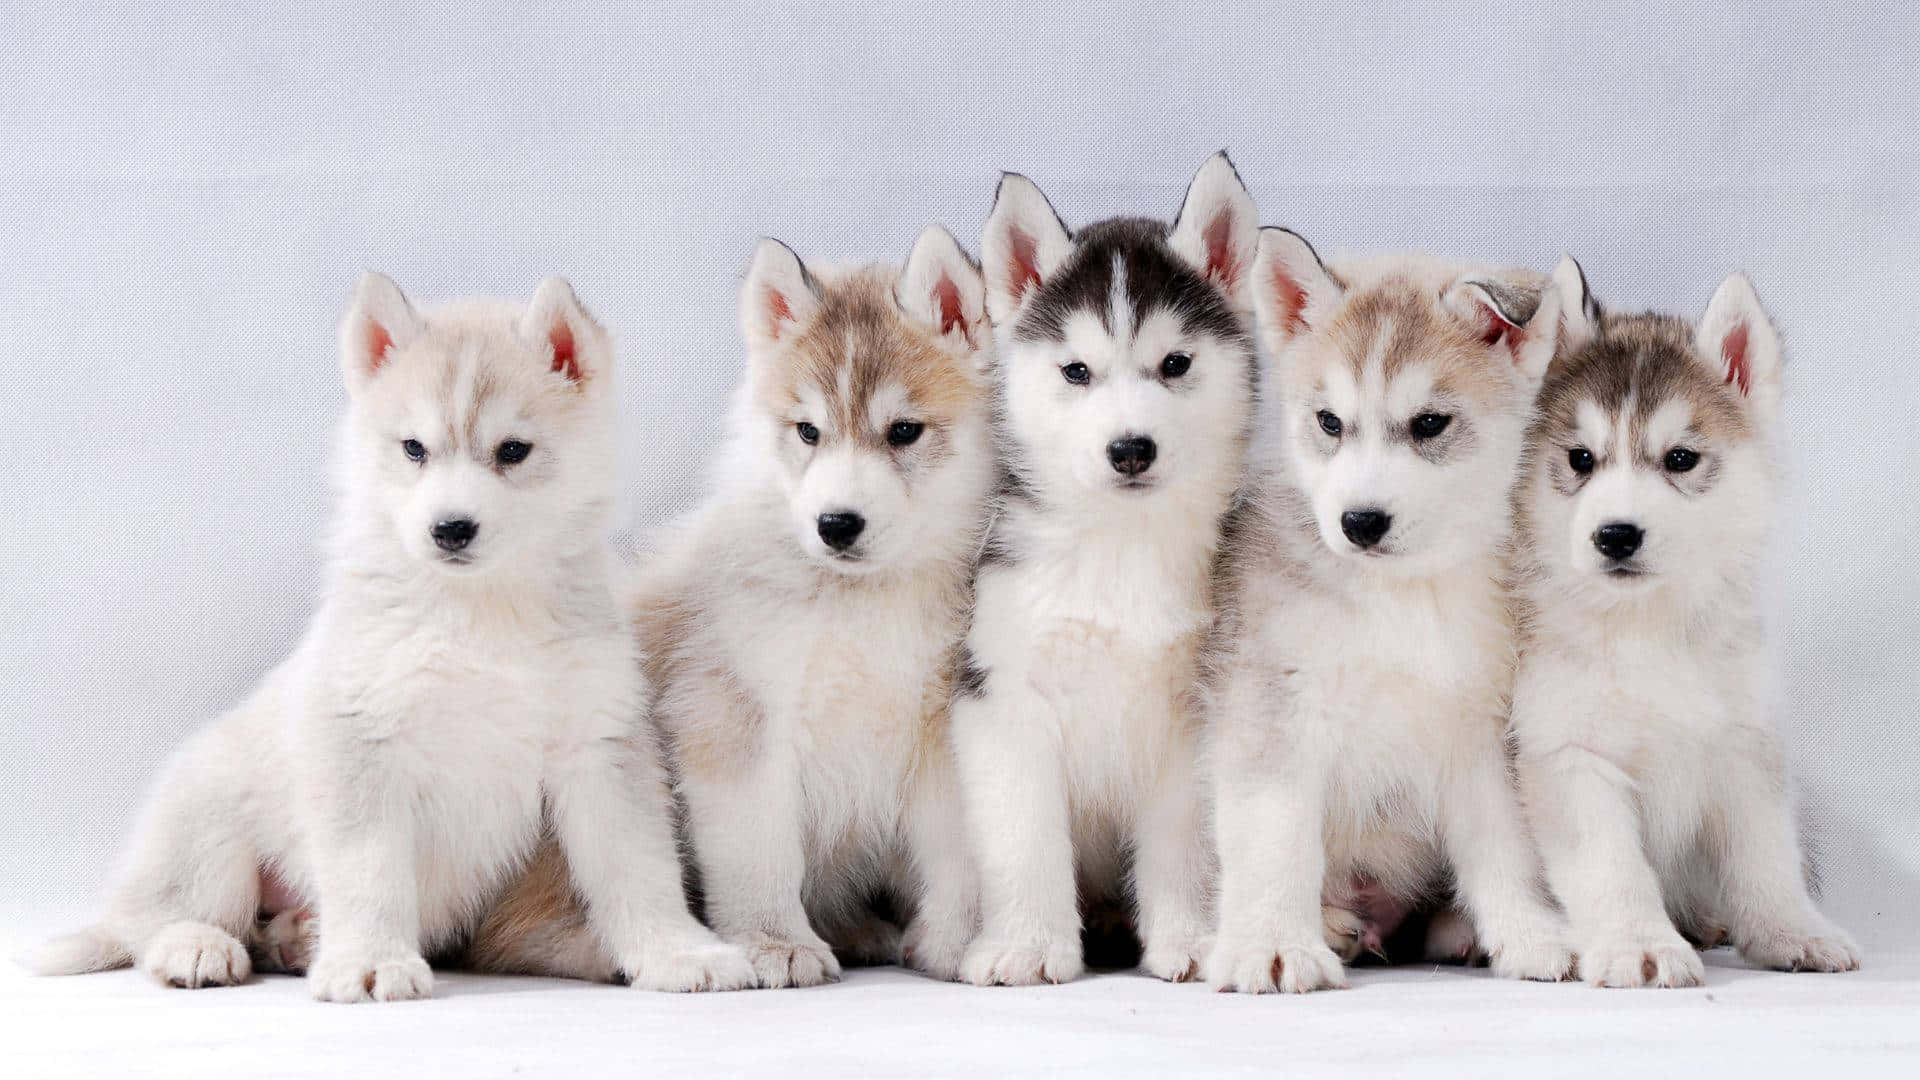 Husky Puppies In A Row On A White Background Wallpaper